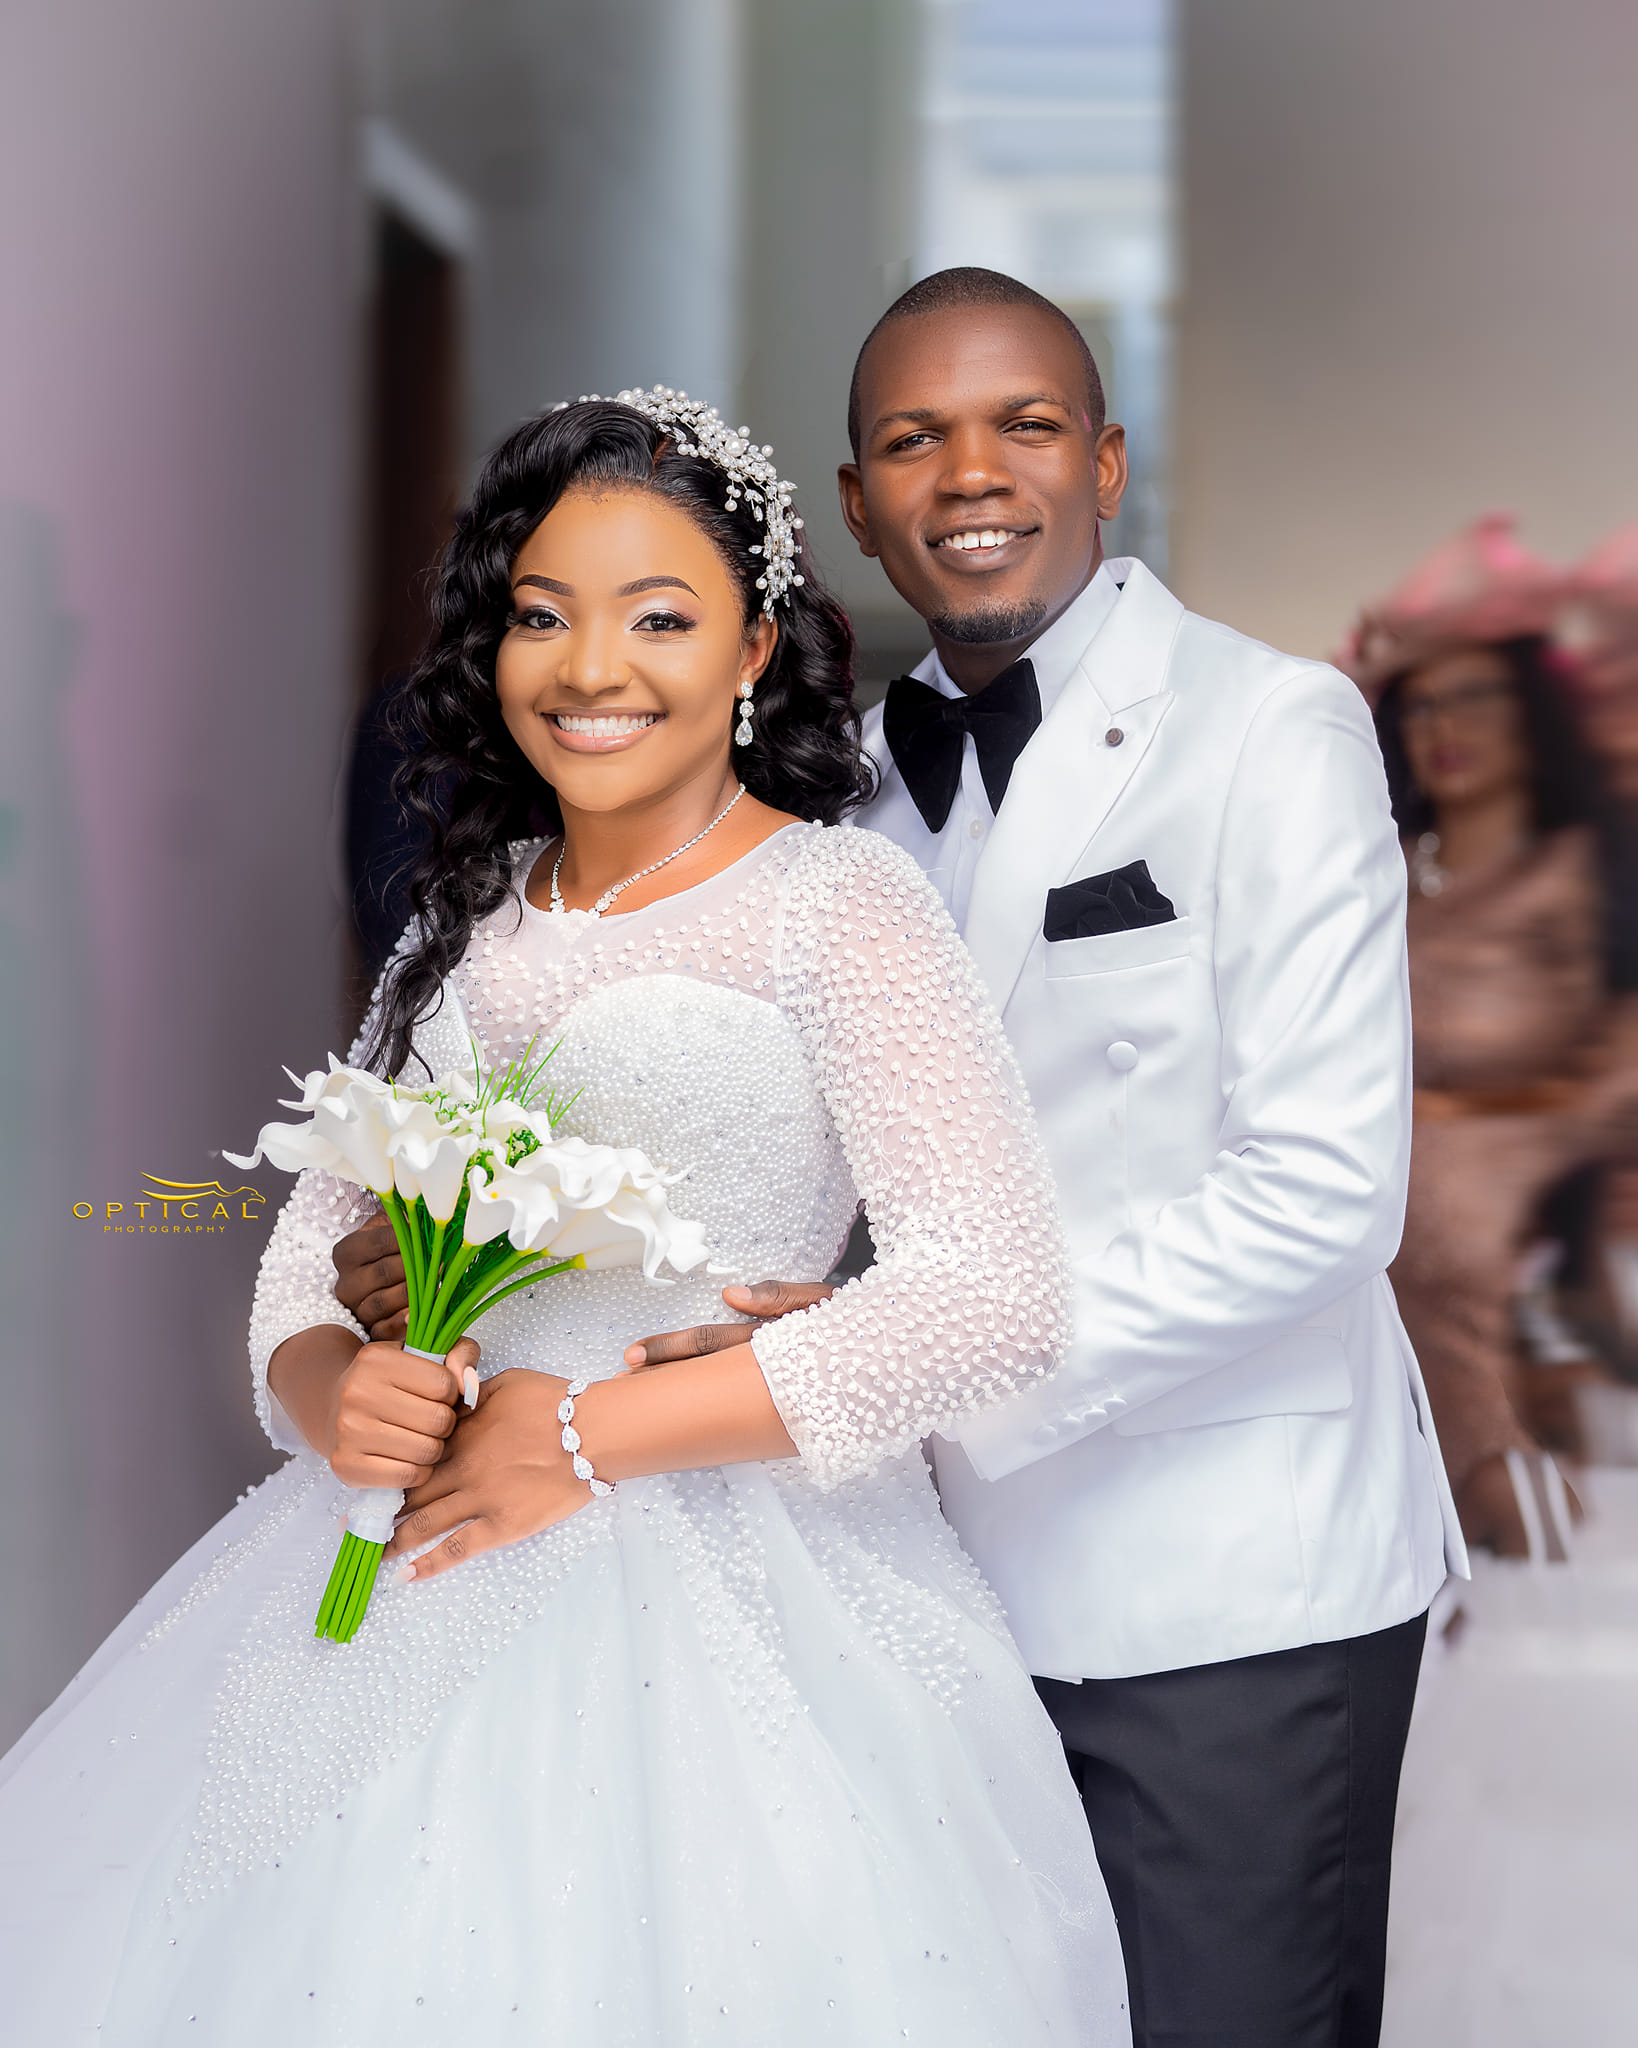 MC Gome breaks silence on his disrupted wedding (watch video) - Face of ...